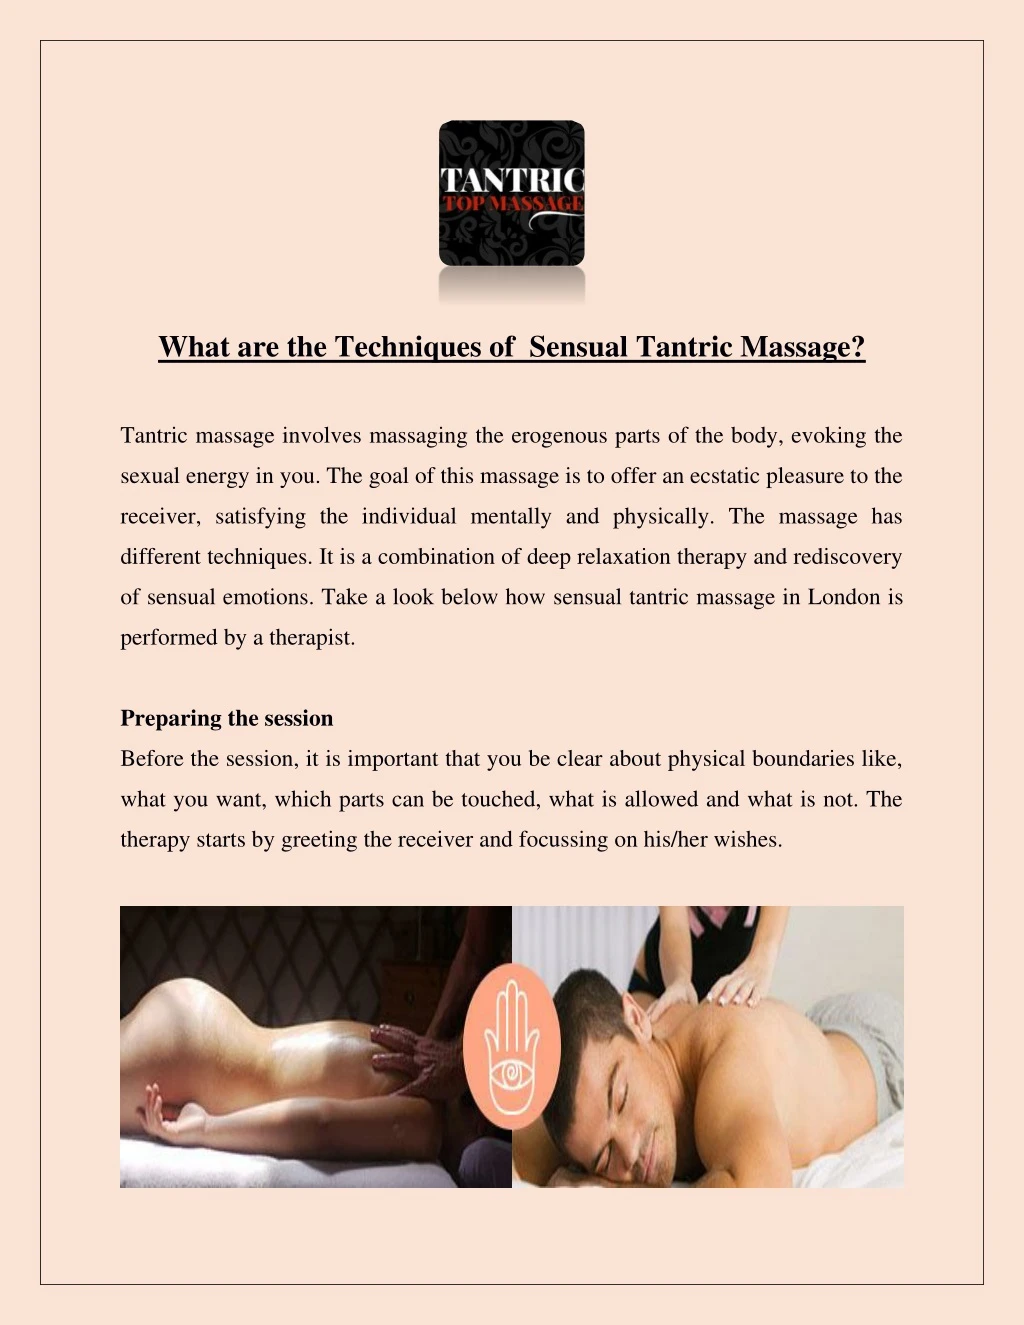 what are the techniques of sensual tantric massage